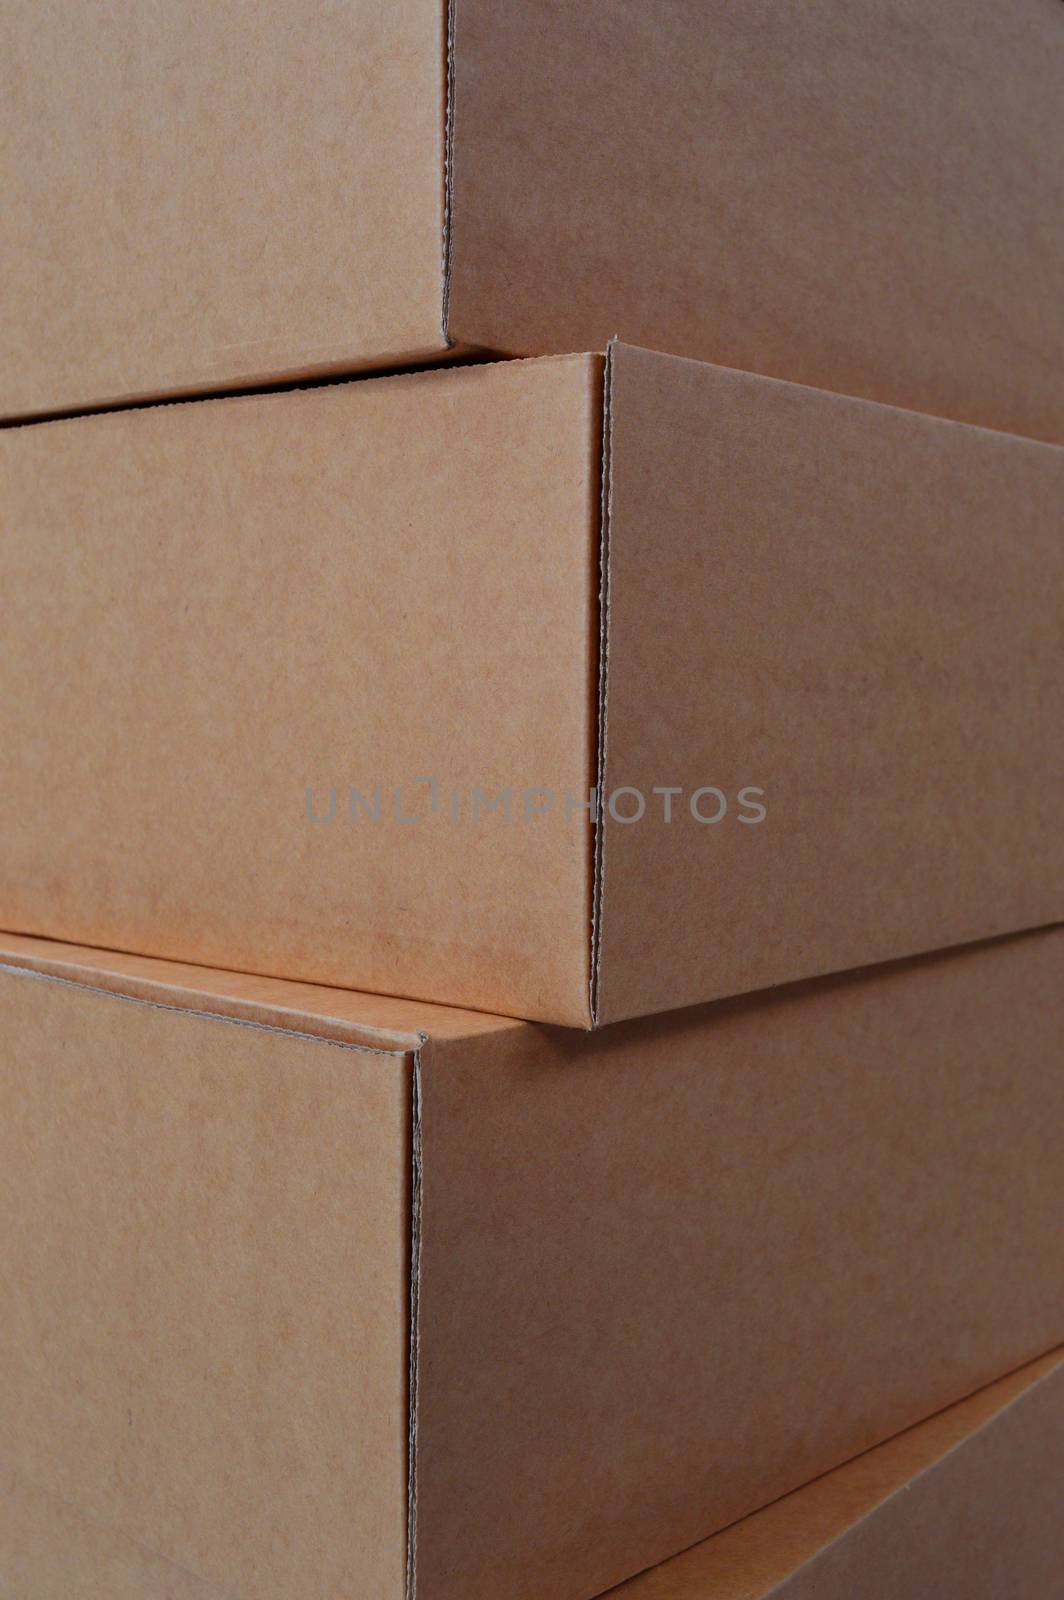 A corner angle of a stack of cardboard boxes